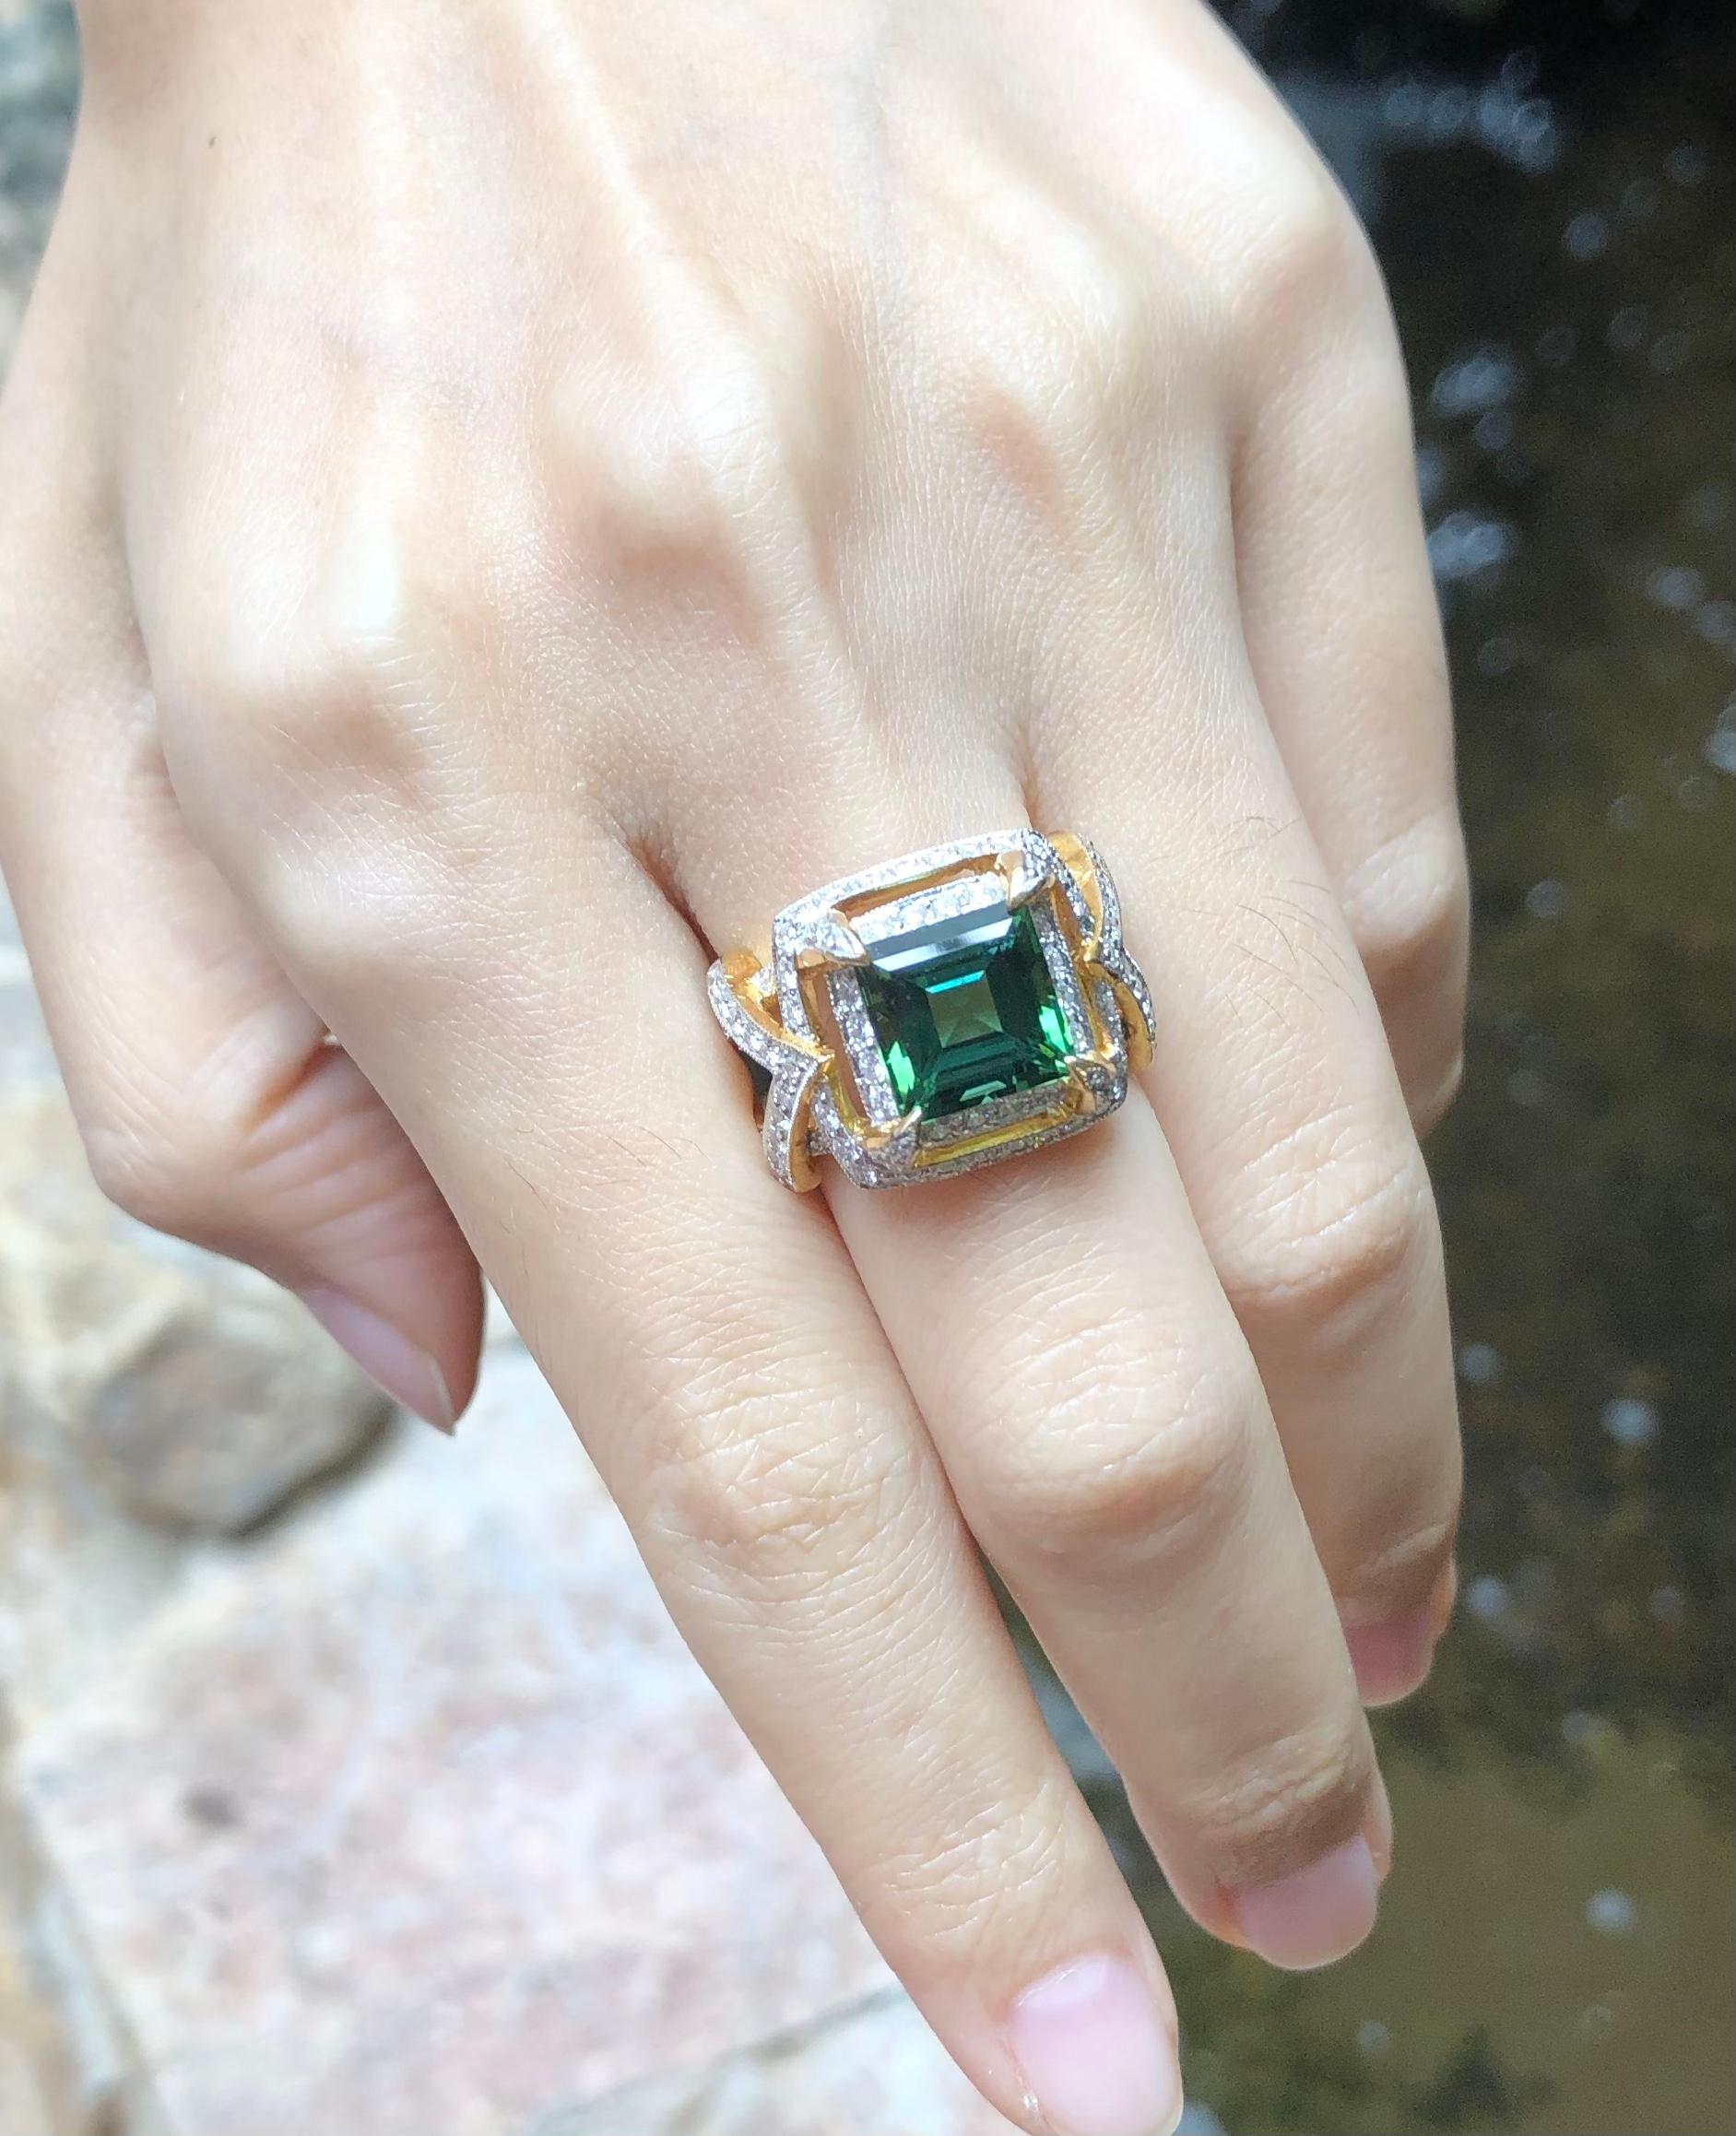 Green Tourmaline 4.0 carats with Diamond 1.11 carats Ring set in 18 Karat Gold Settings

Width:  1.5 cm 
Length: 1.5 cm
Ring Size: 53
Total Weight: 11.18 grams

